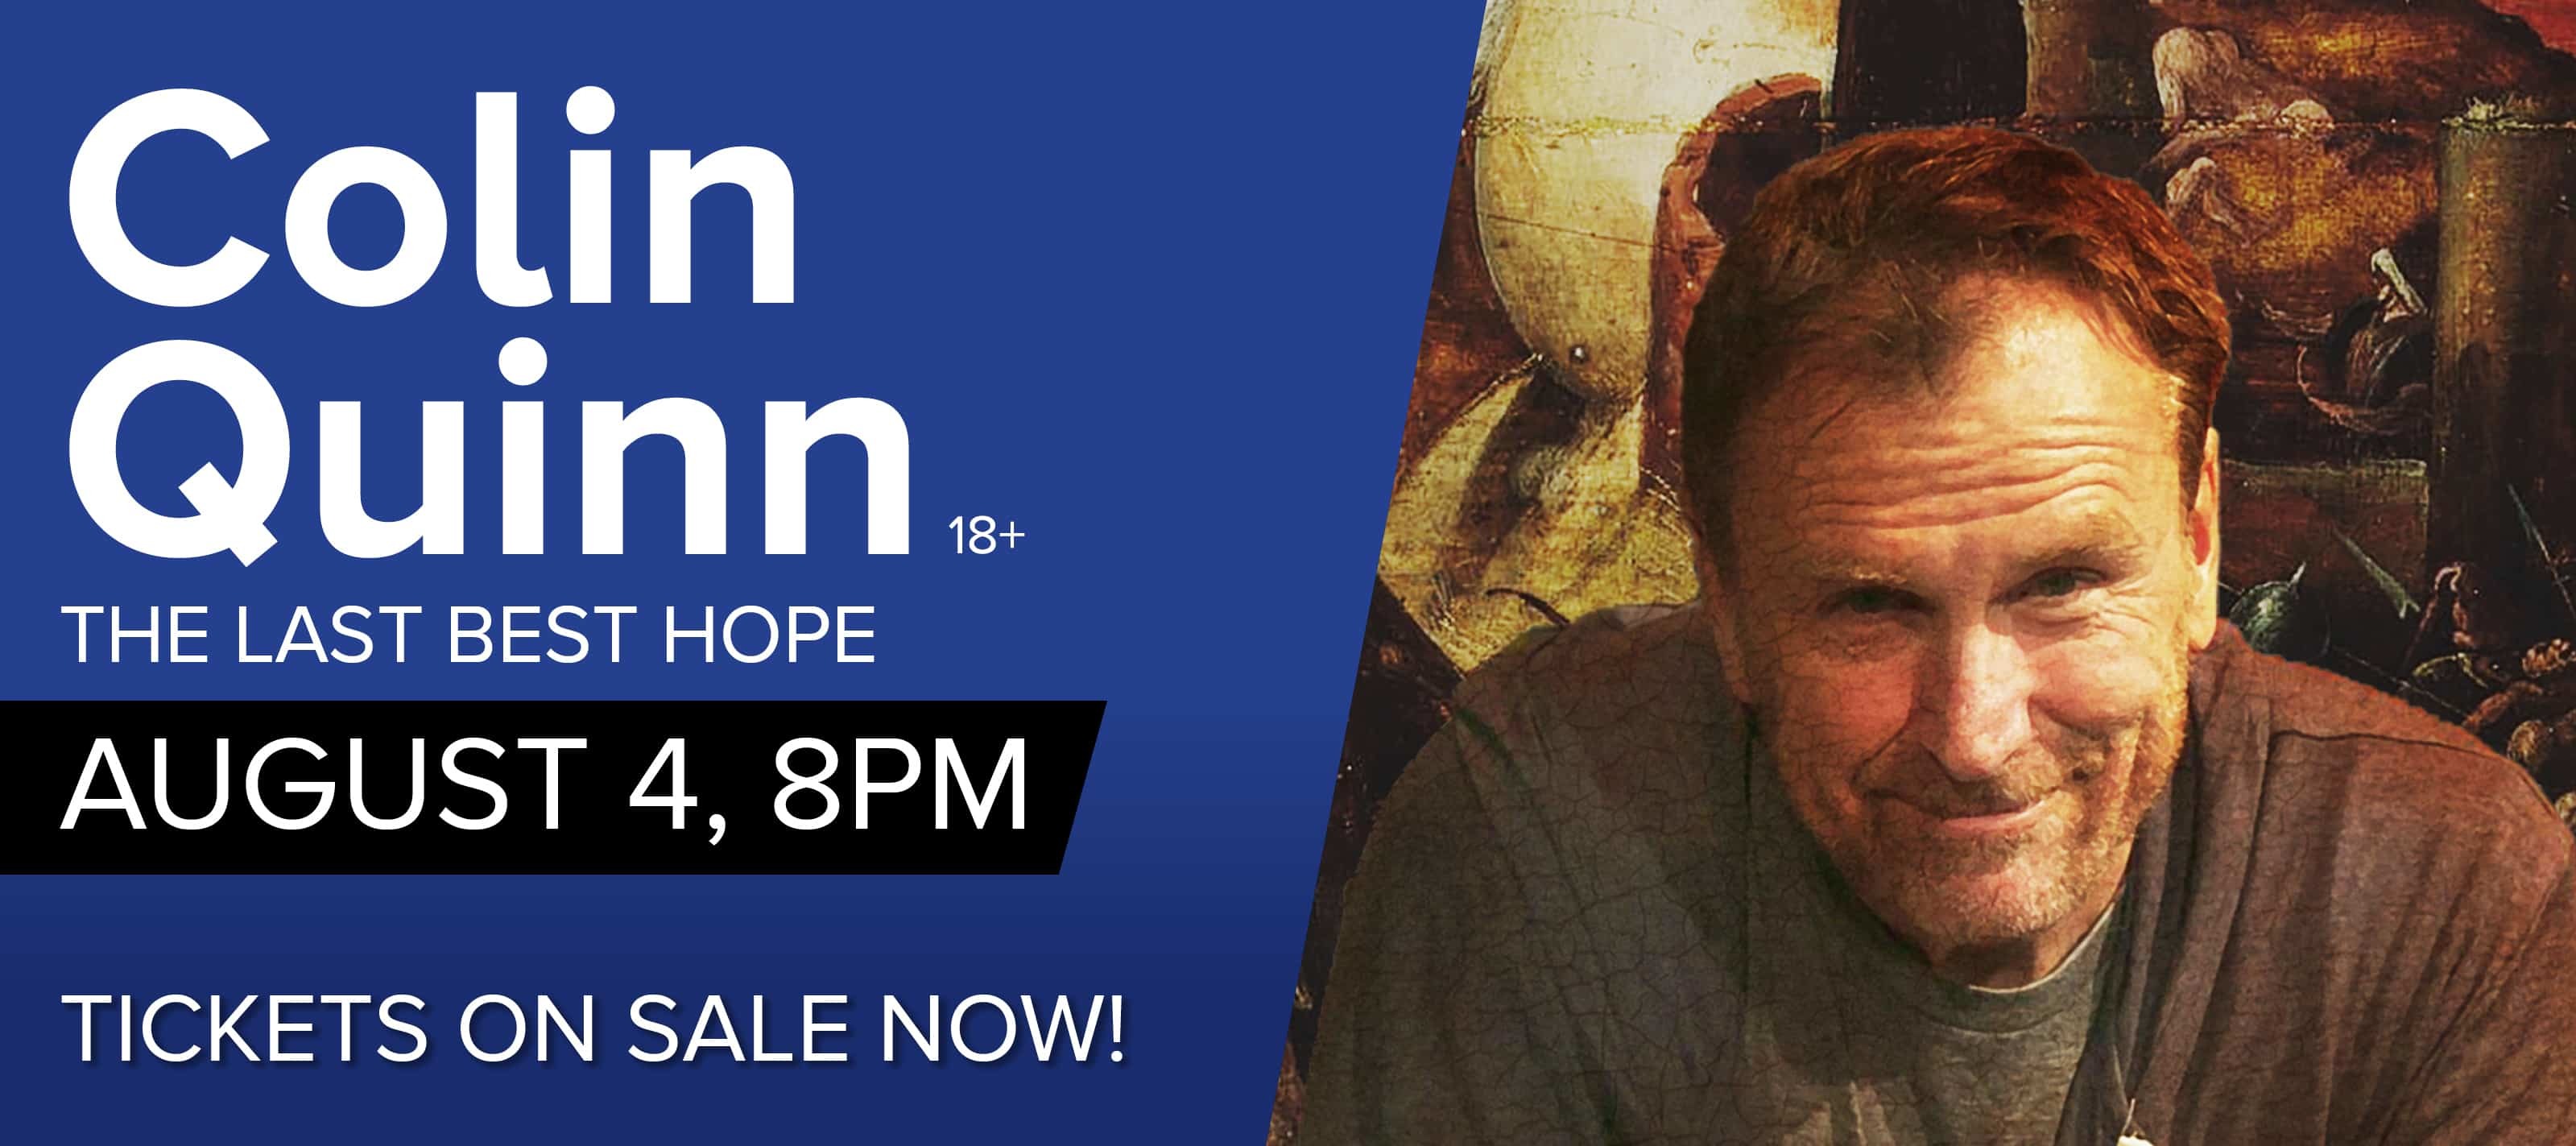 Painted portrait of stand up comedian Colin Quinn .  Text: Colin Quinn The Last Best Hope Tickets On Sale Now. Show on August 4 at 8pm